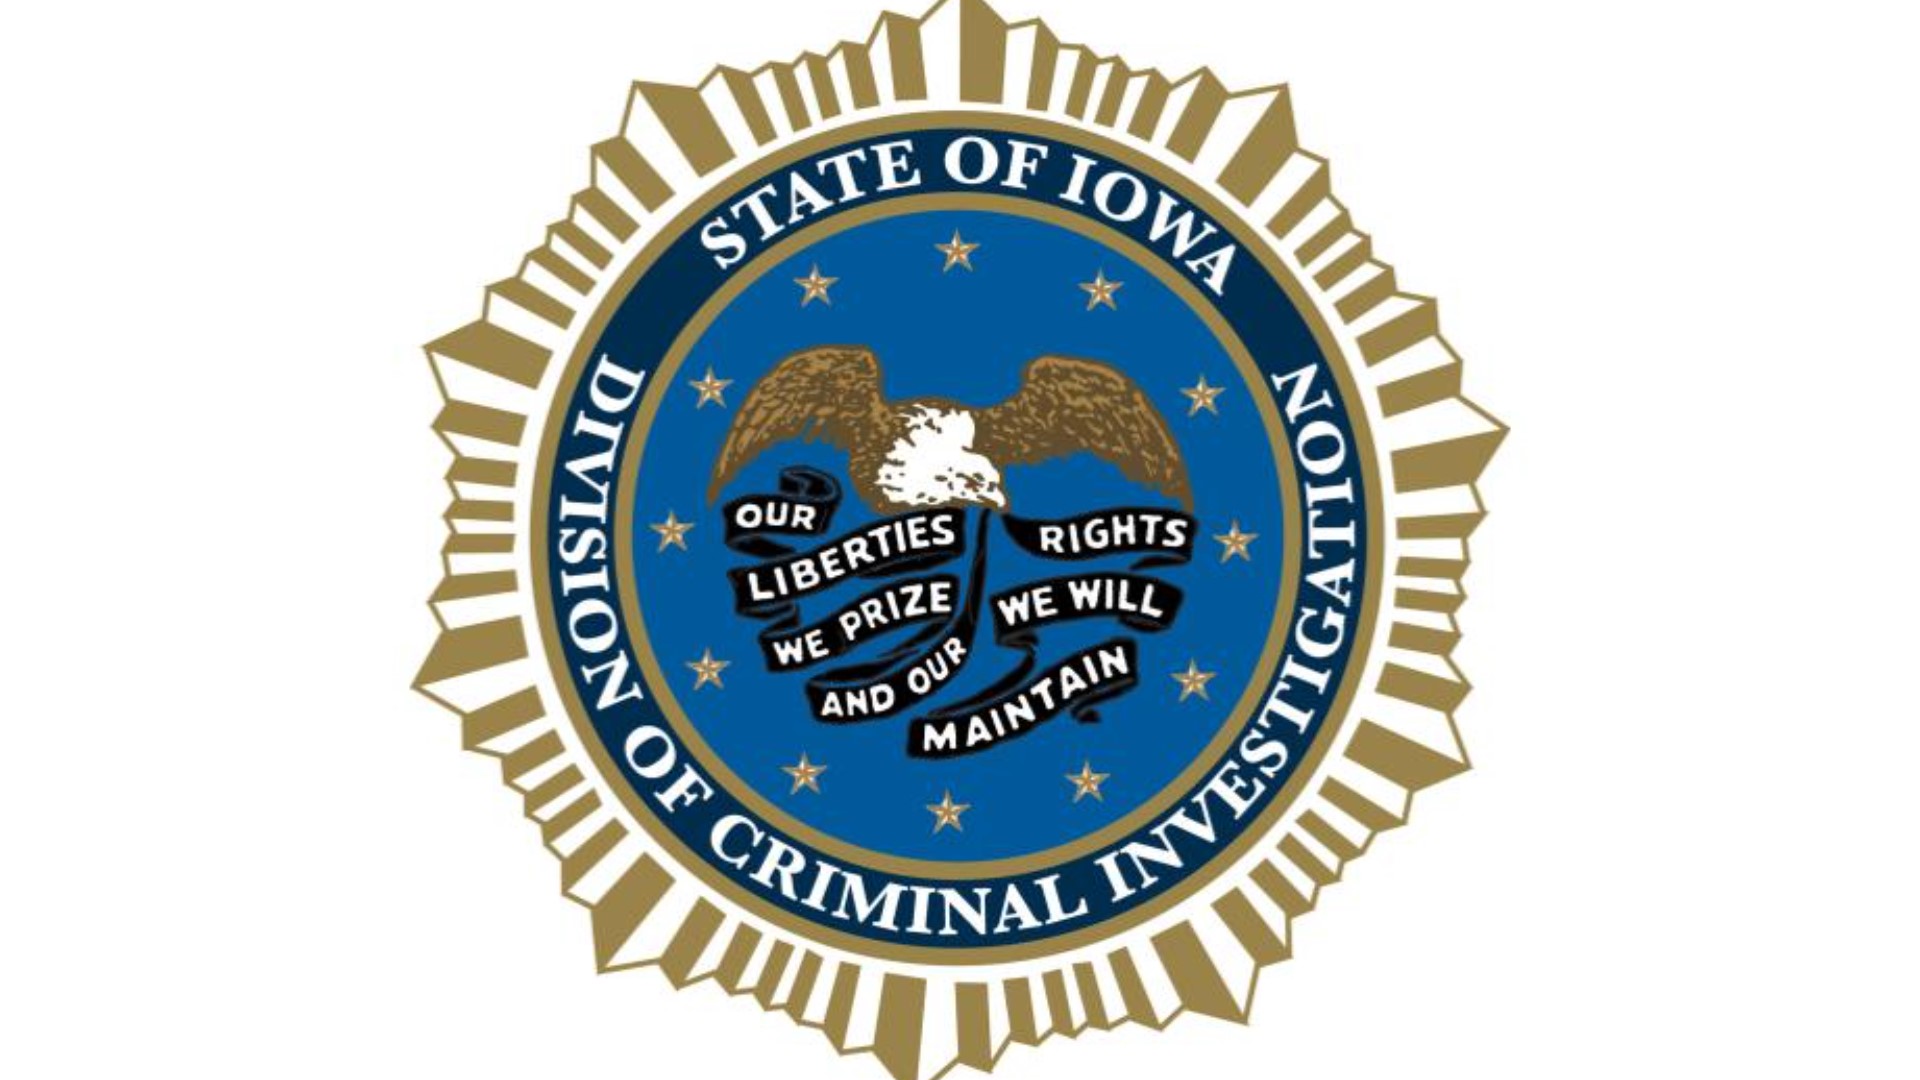 "We would like to thank the public for their assistance in locating Fallon," the Iowa Division of Criminal Investigation said in a release.